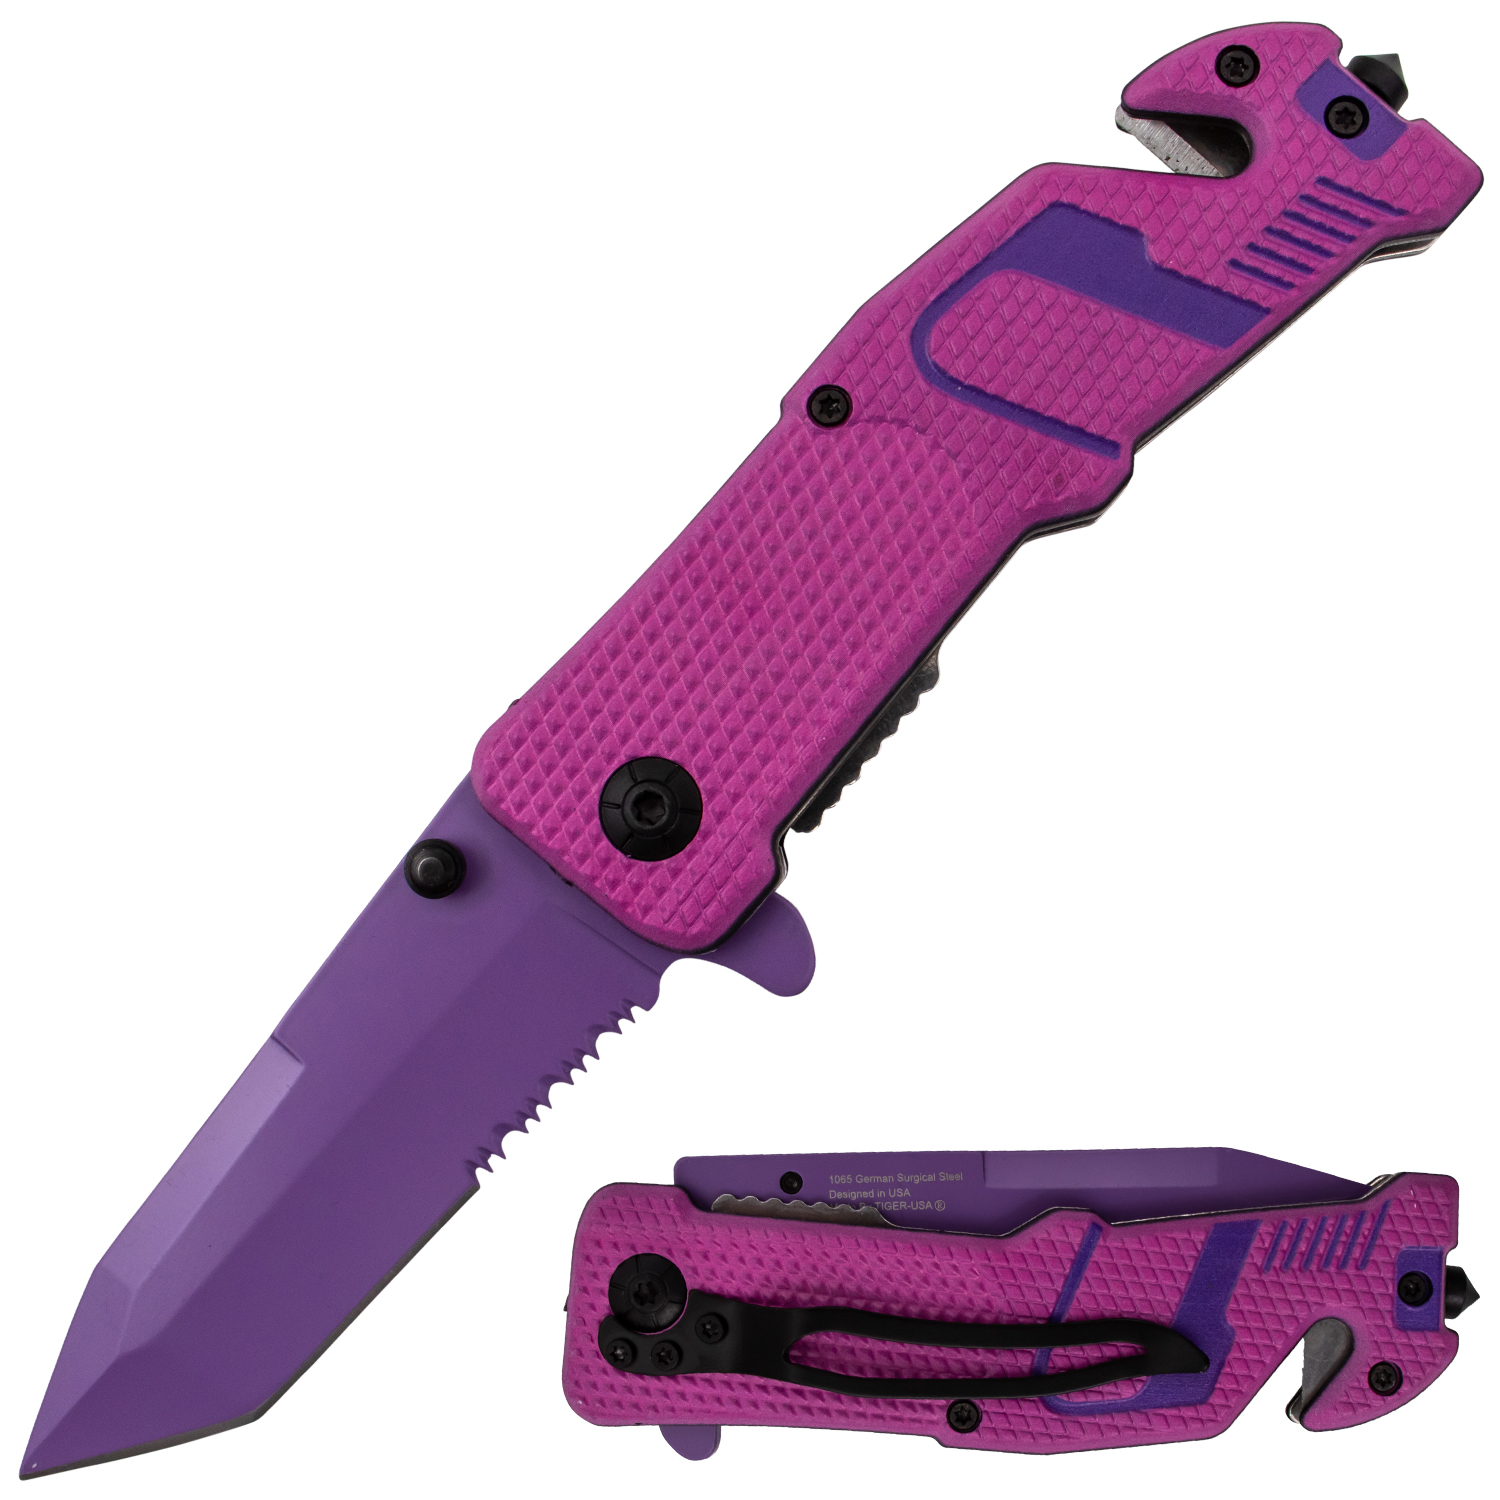 Tiger USA Sneakerhead Trigger Action Knife Tanto Pink Purple